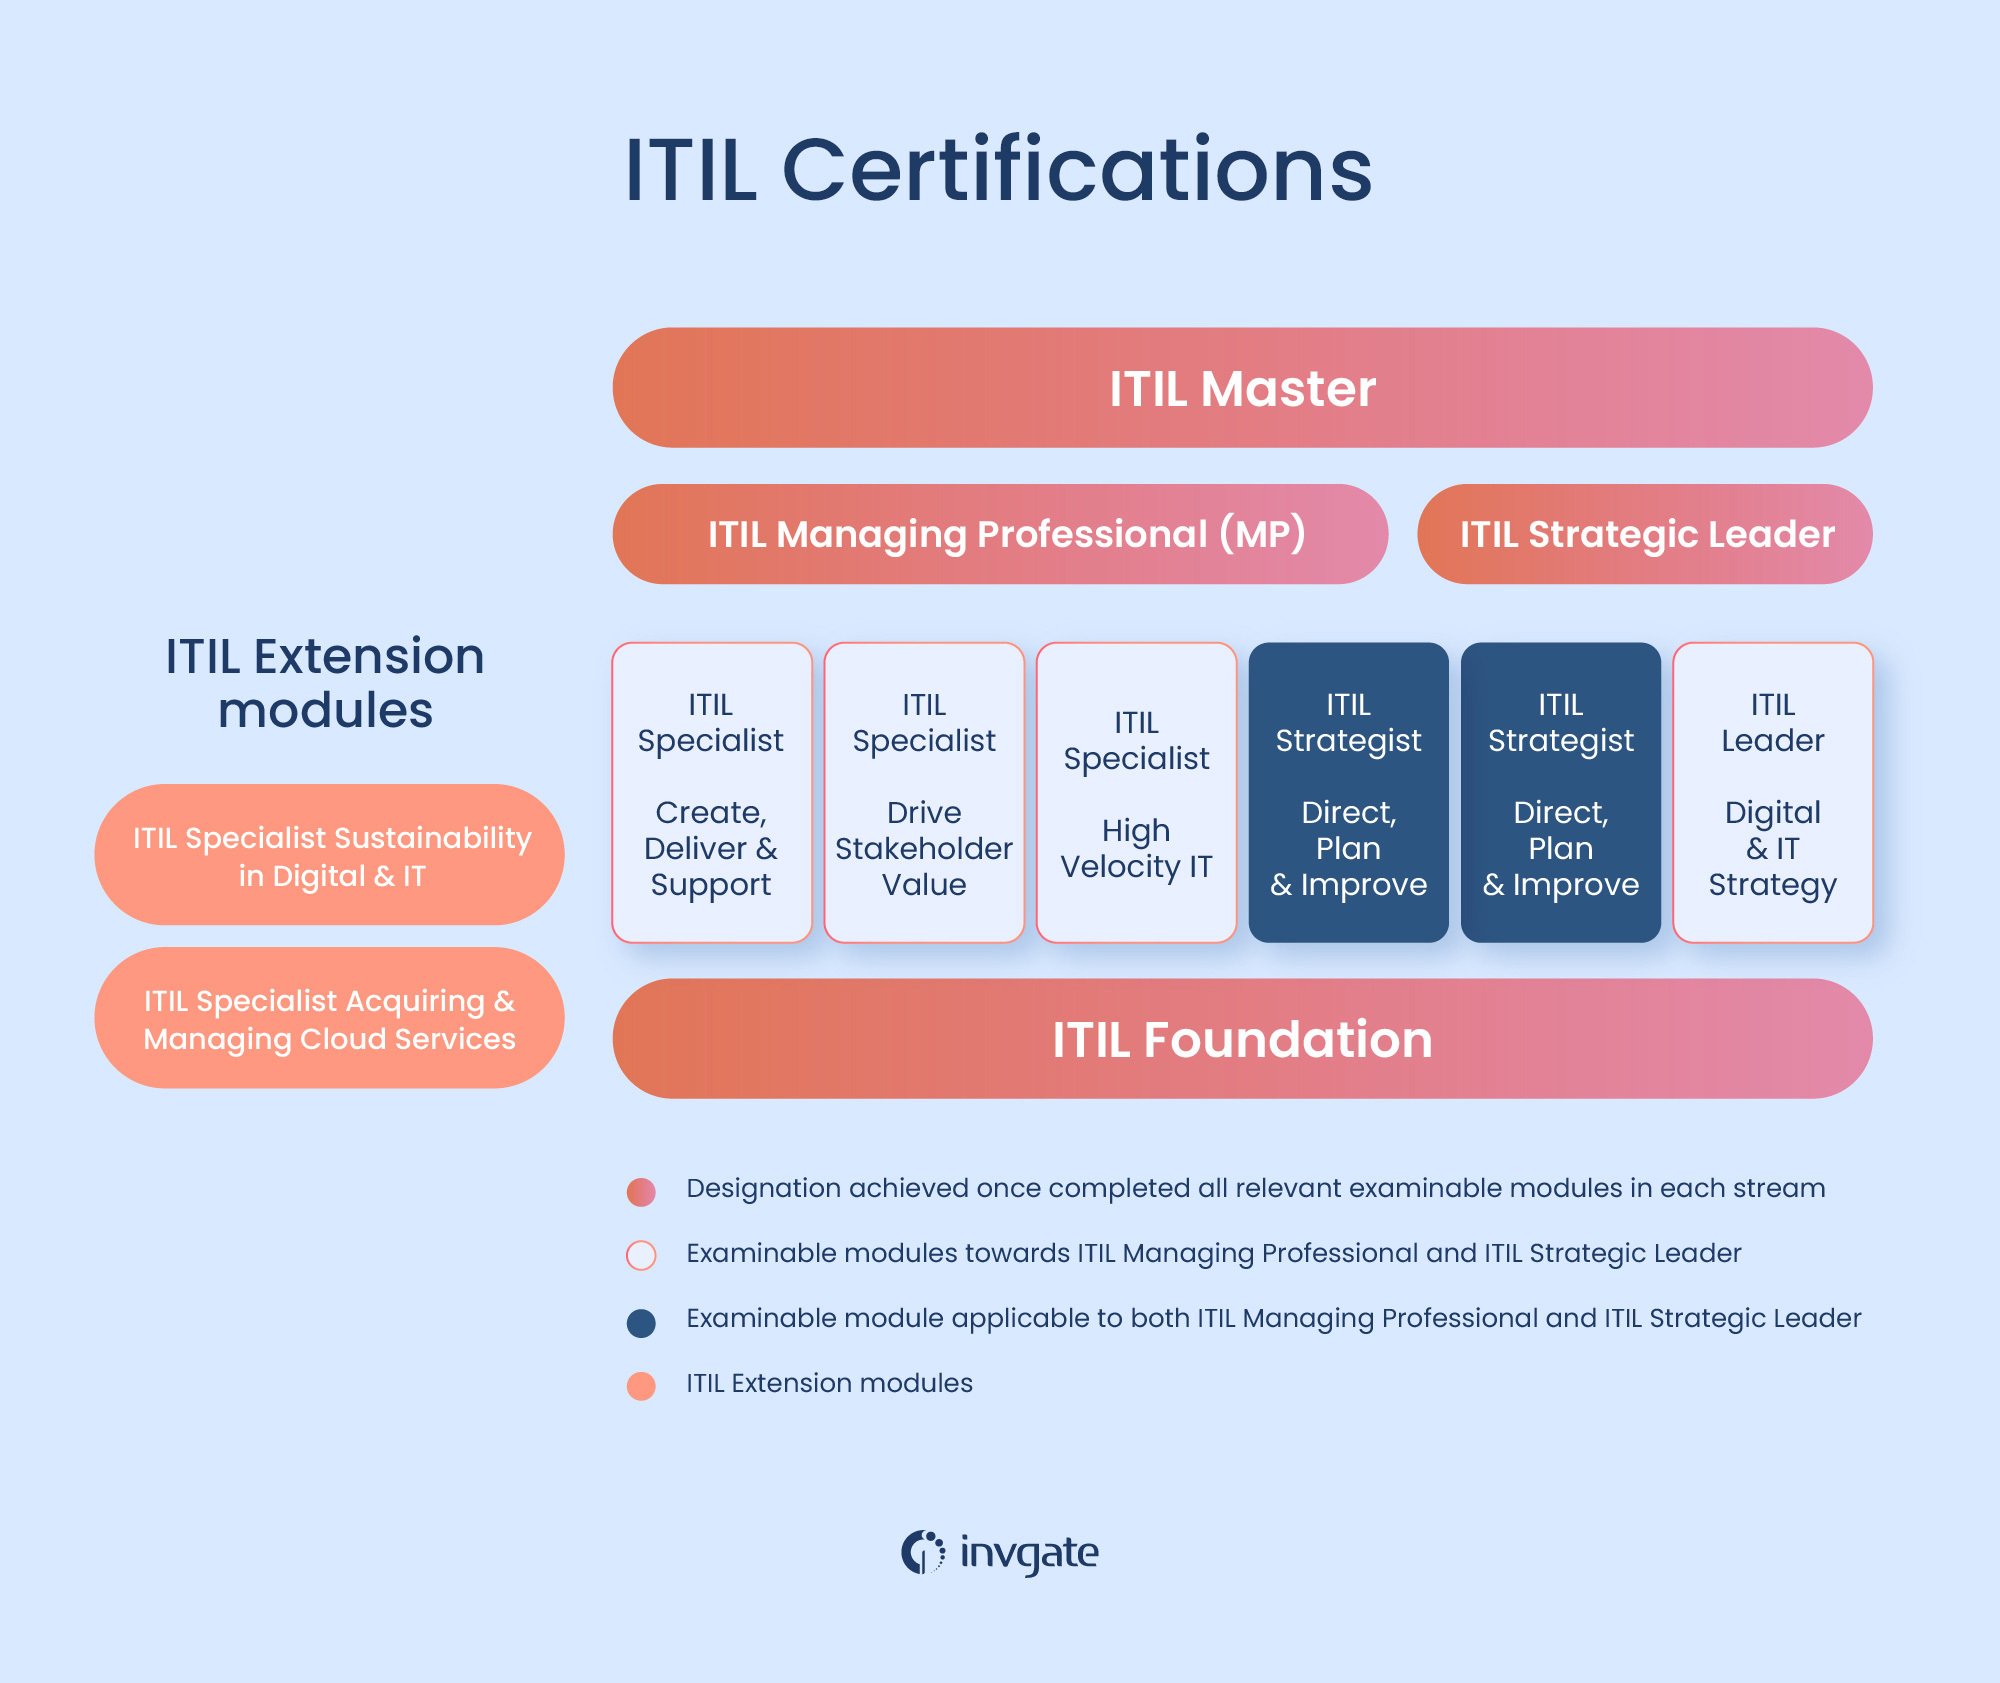 ITIL certifications map